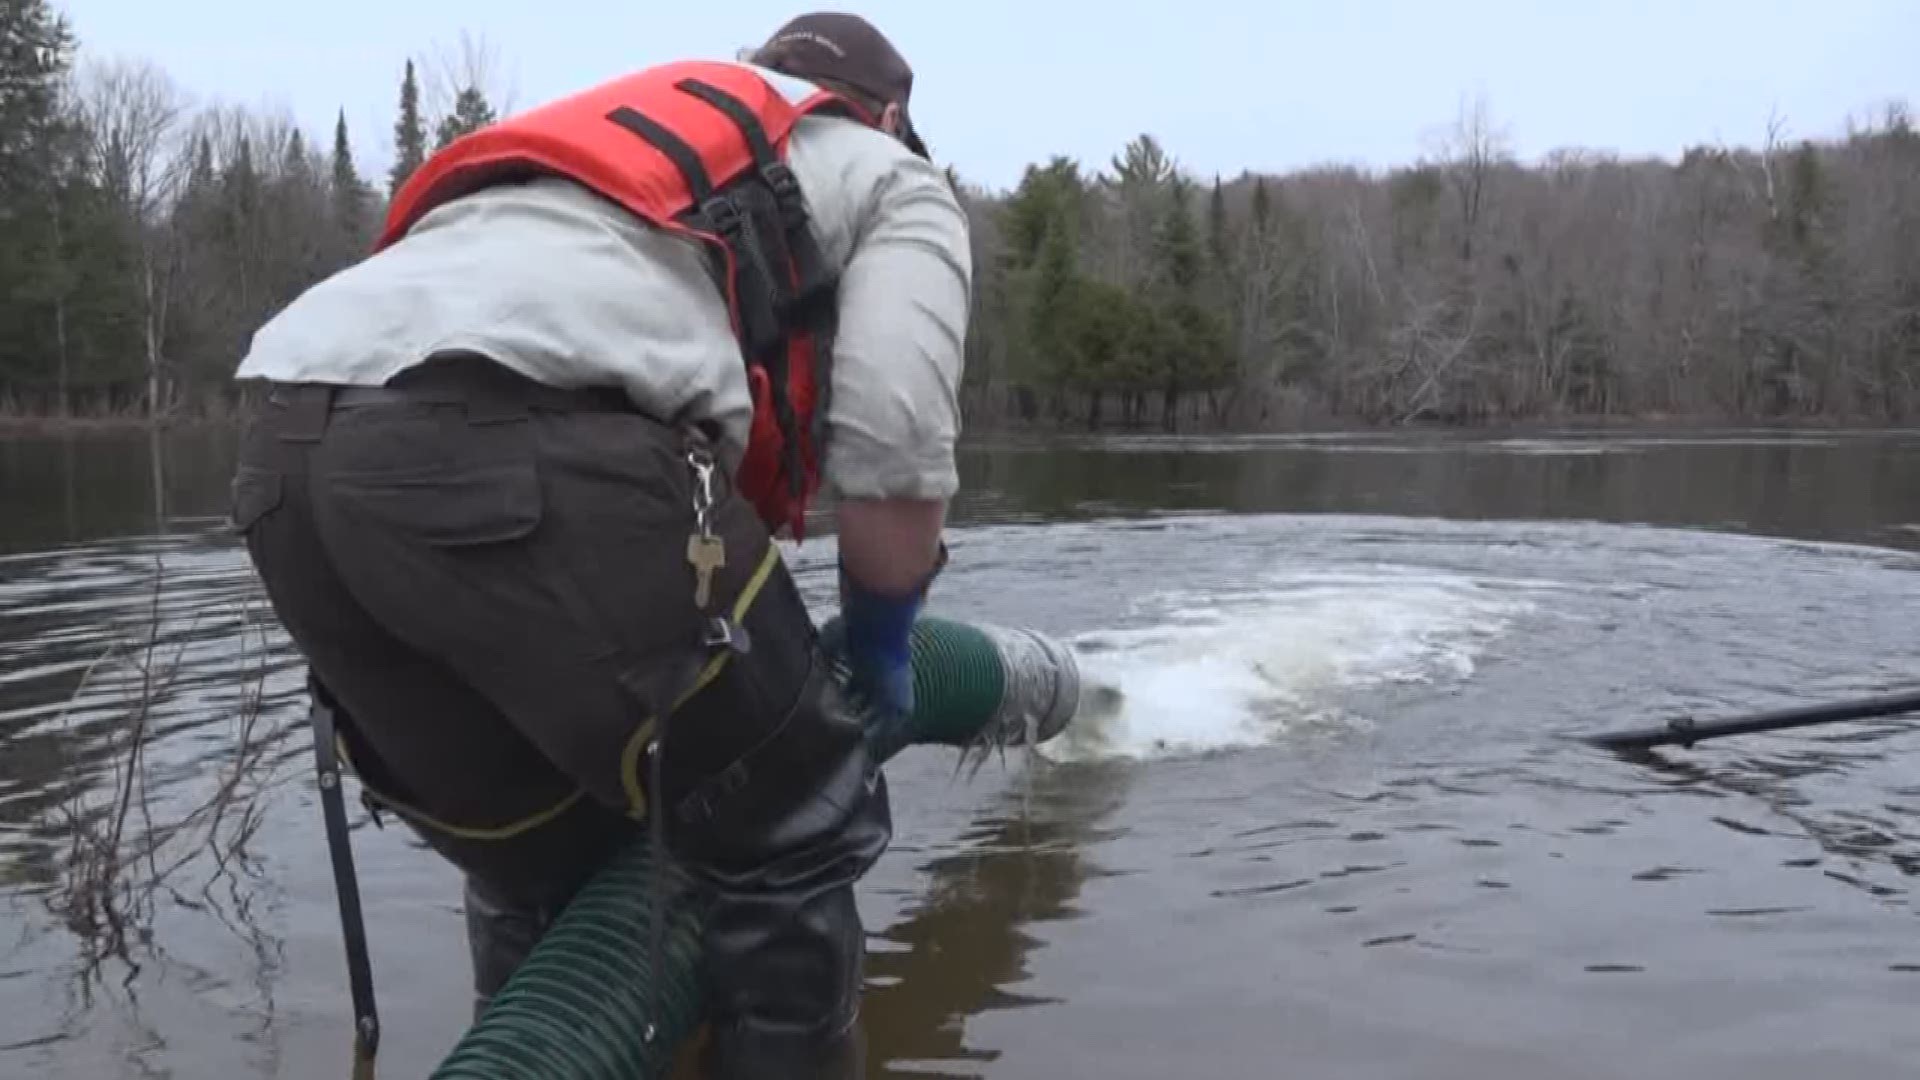 Officials discharged Atlantic salmon into Piscataquis River on Wednesday to increase Maine's natural production of the fish.